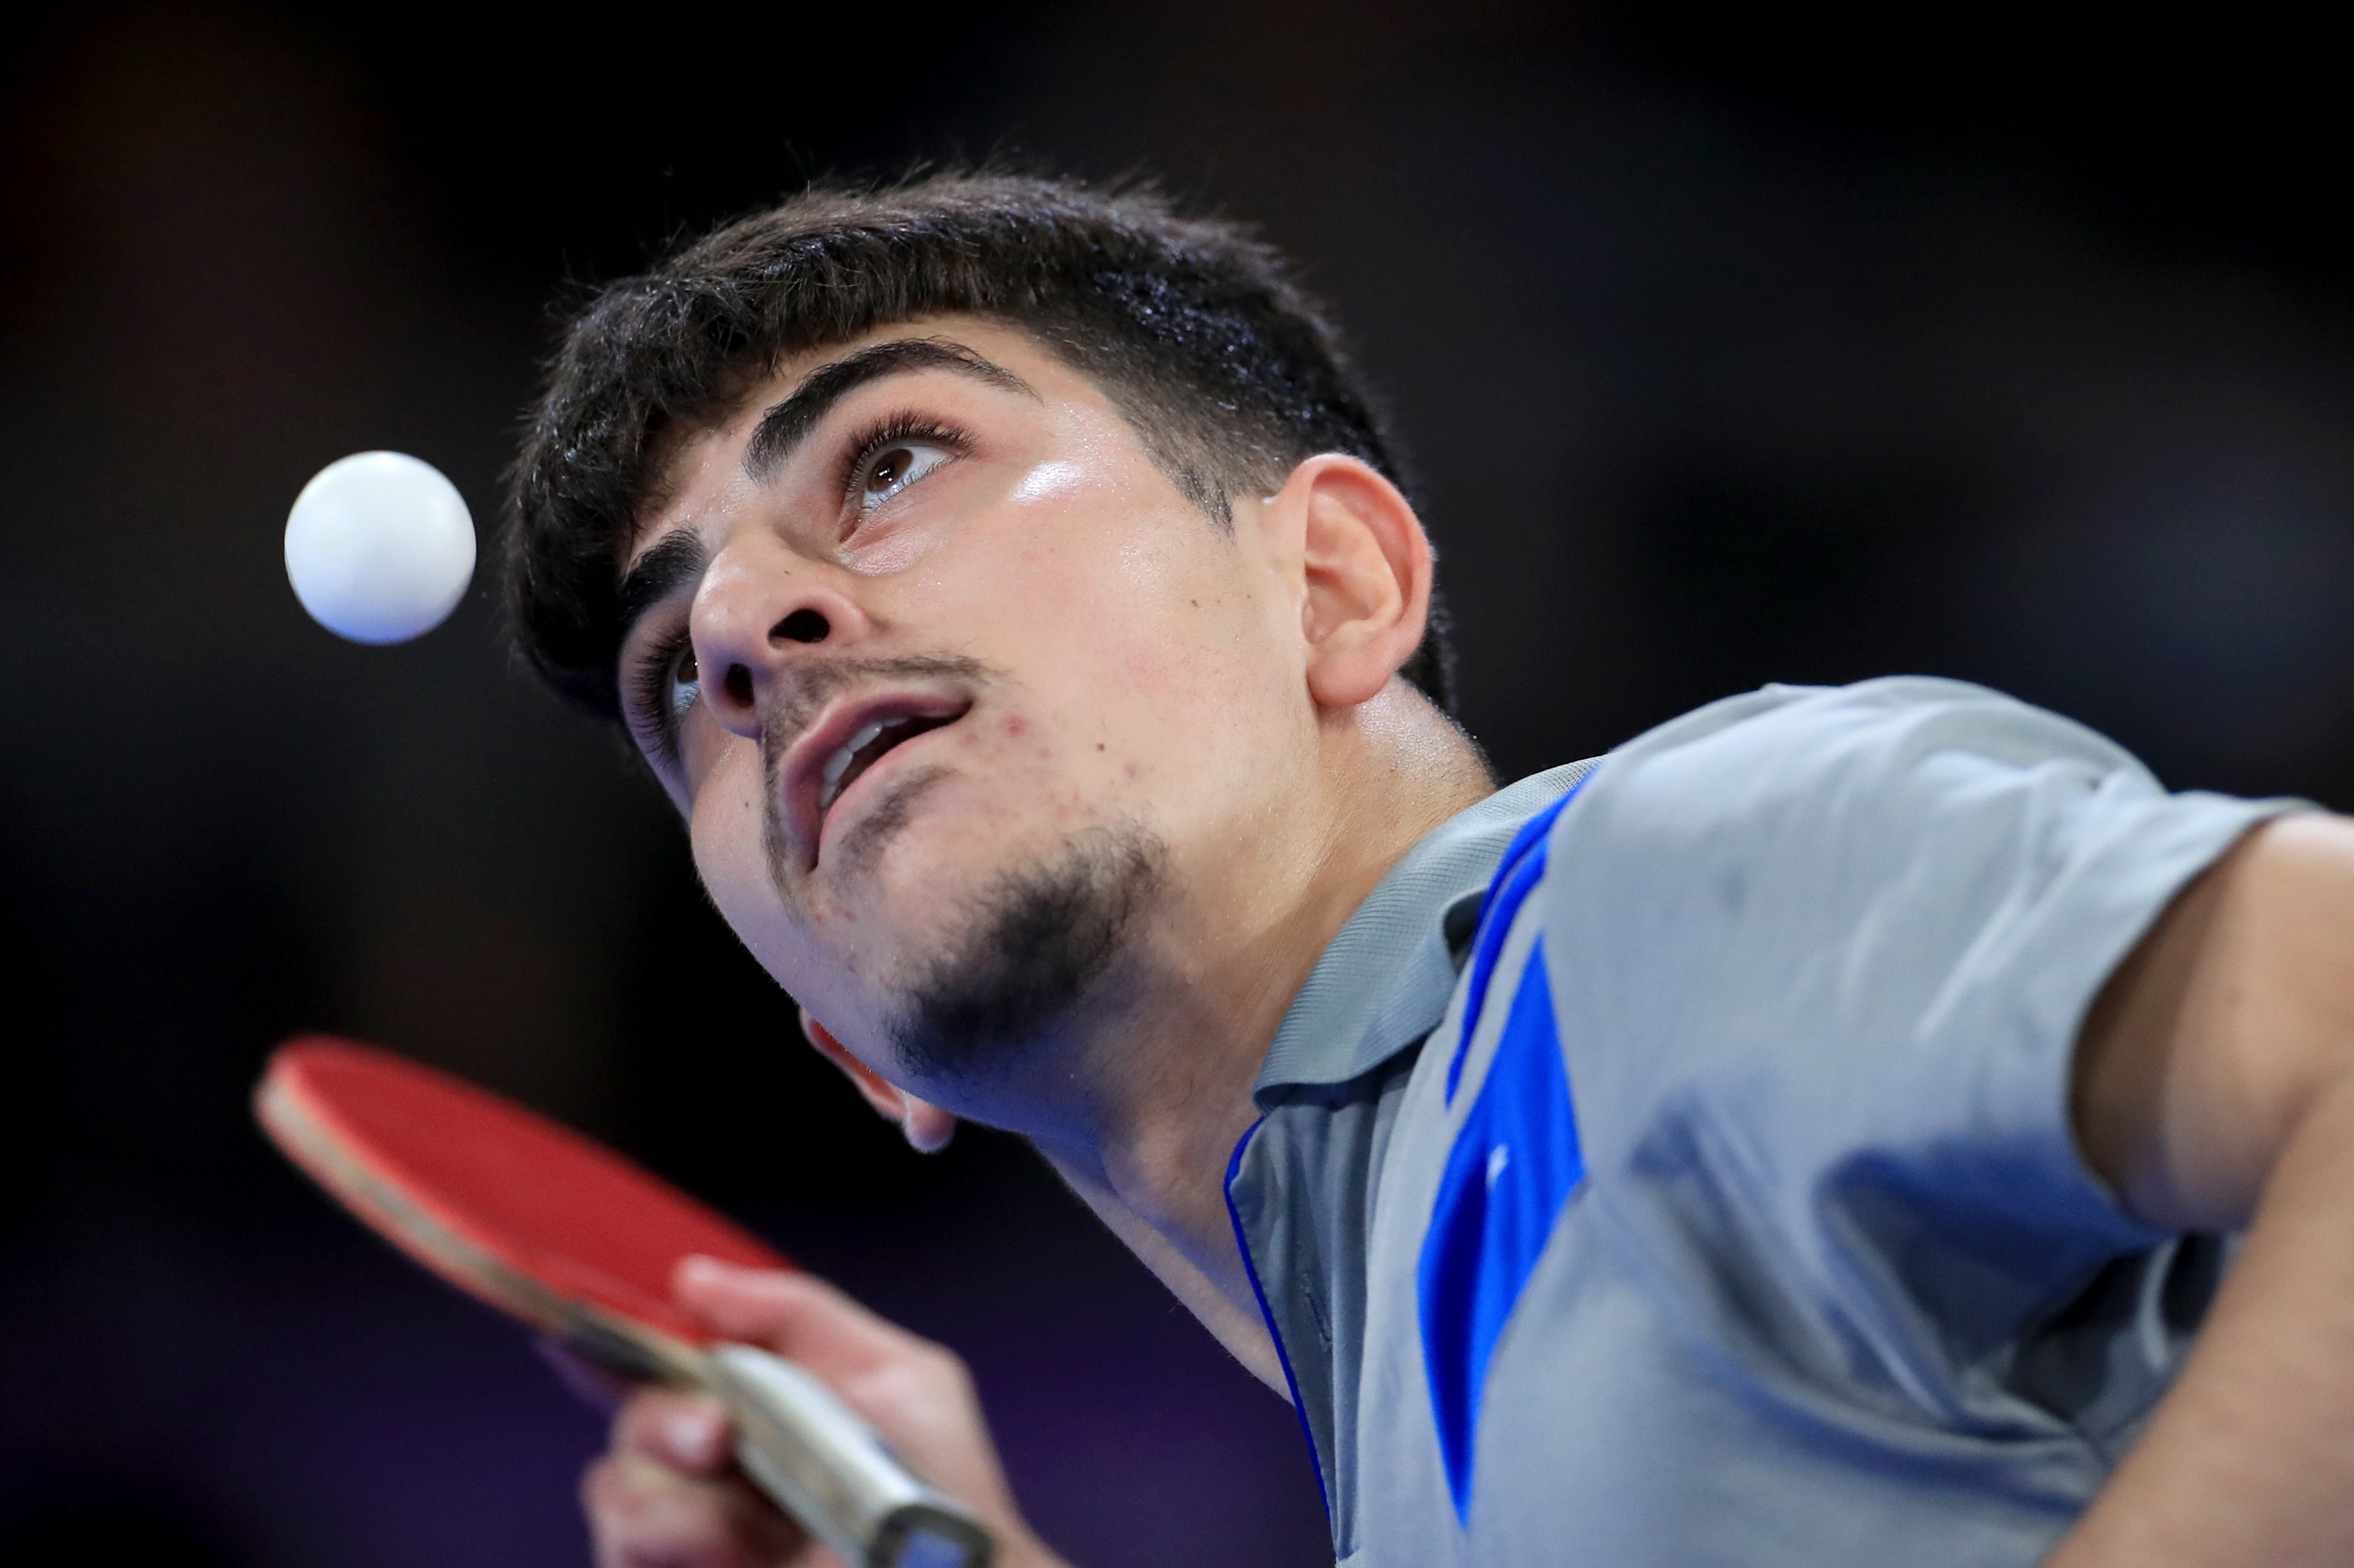 Cyprus’ Sharpel Elia in Commonwealth Games table tennis action (Bradley Collyer/PA)